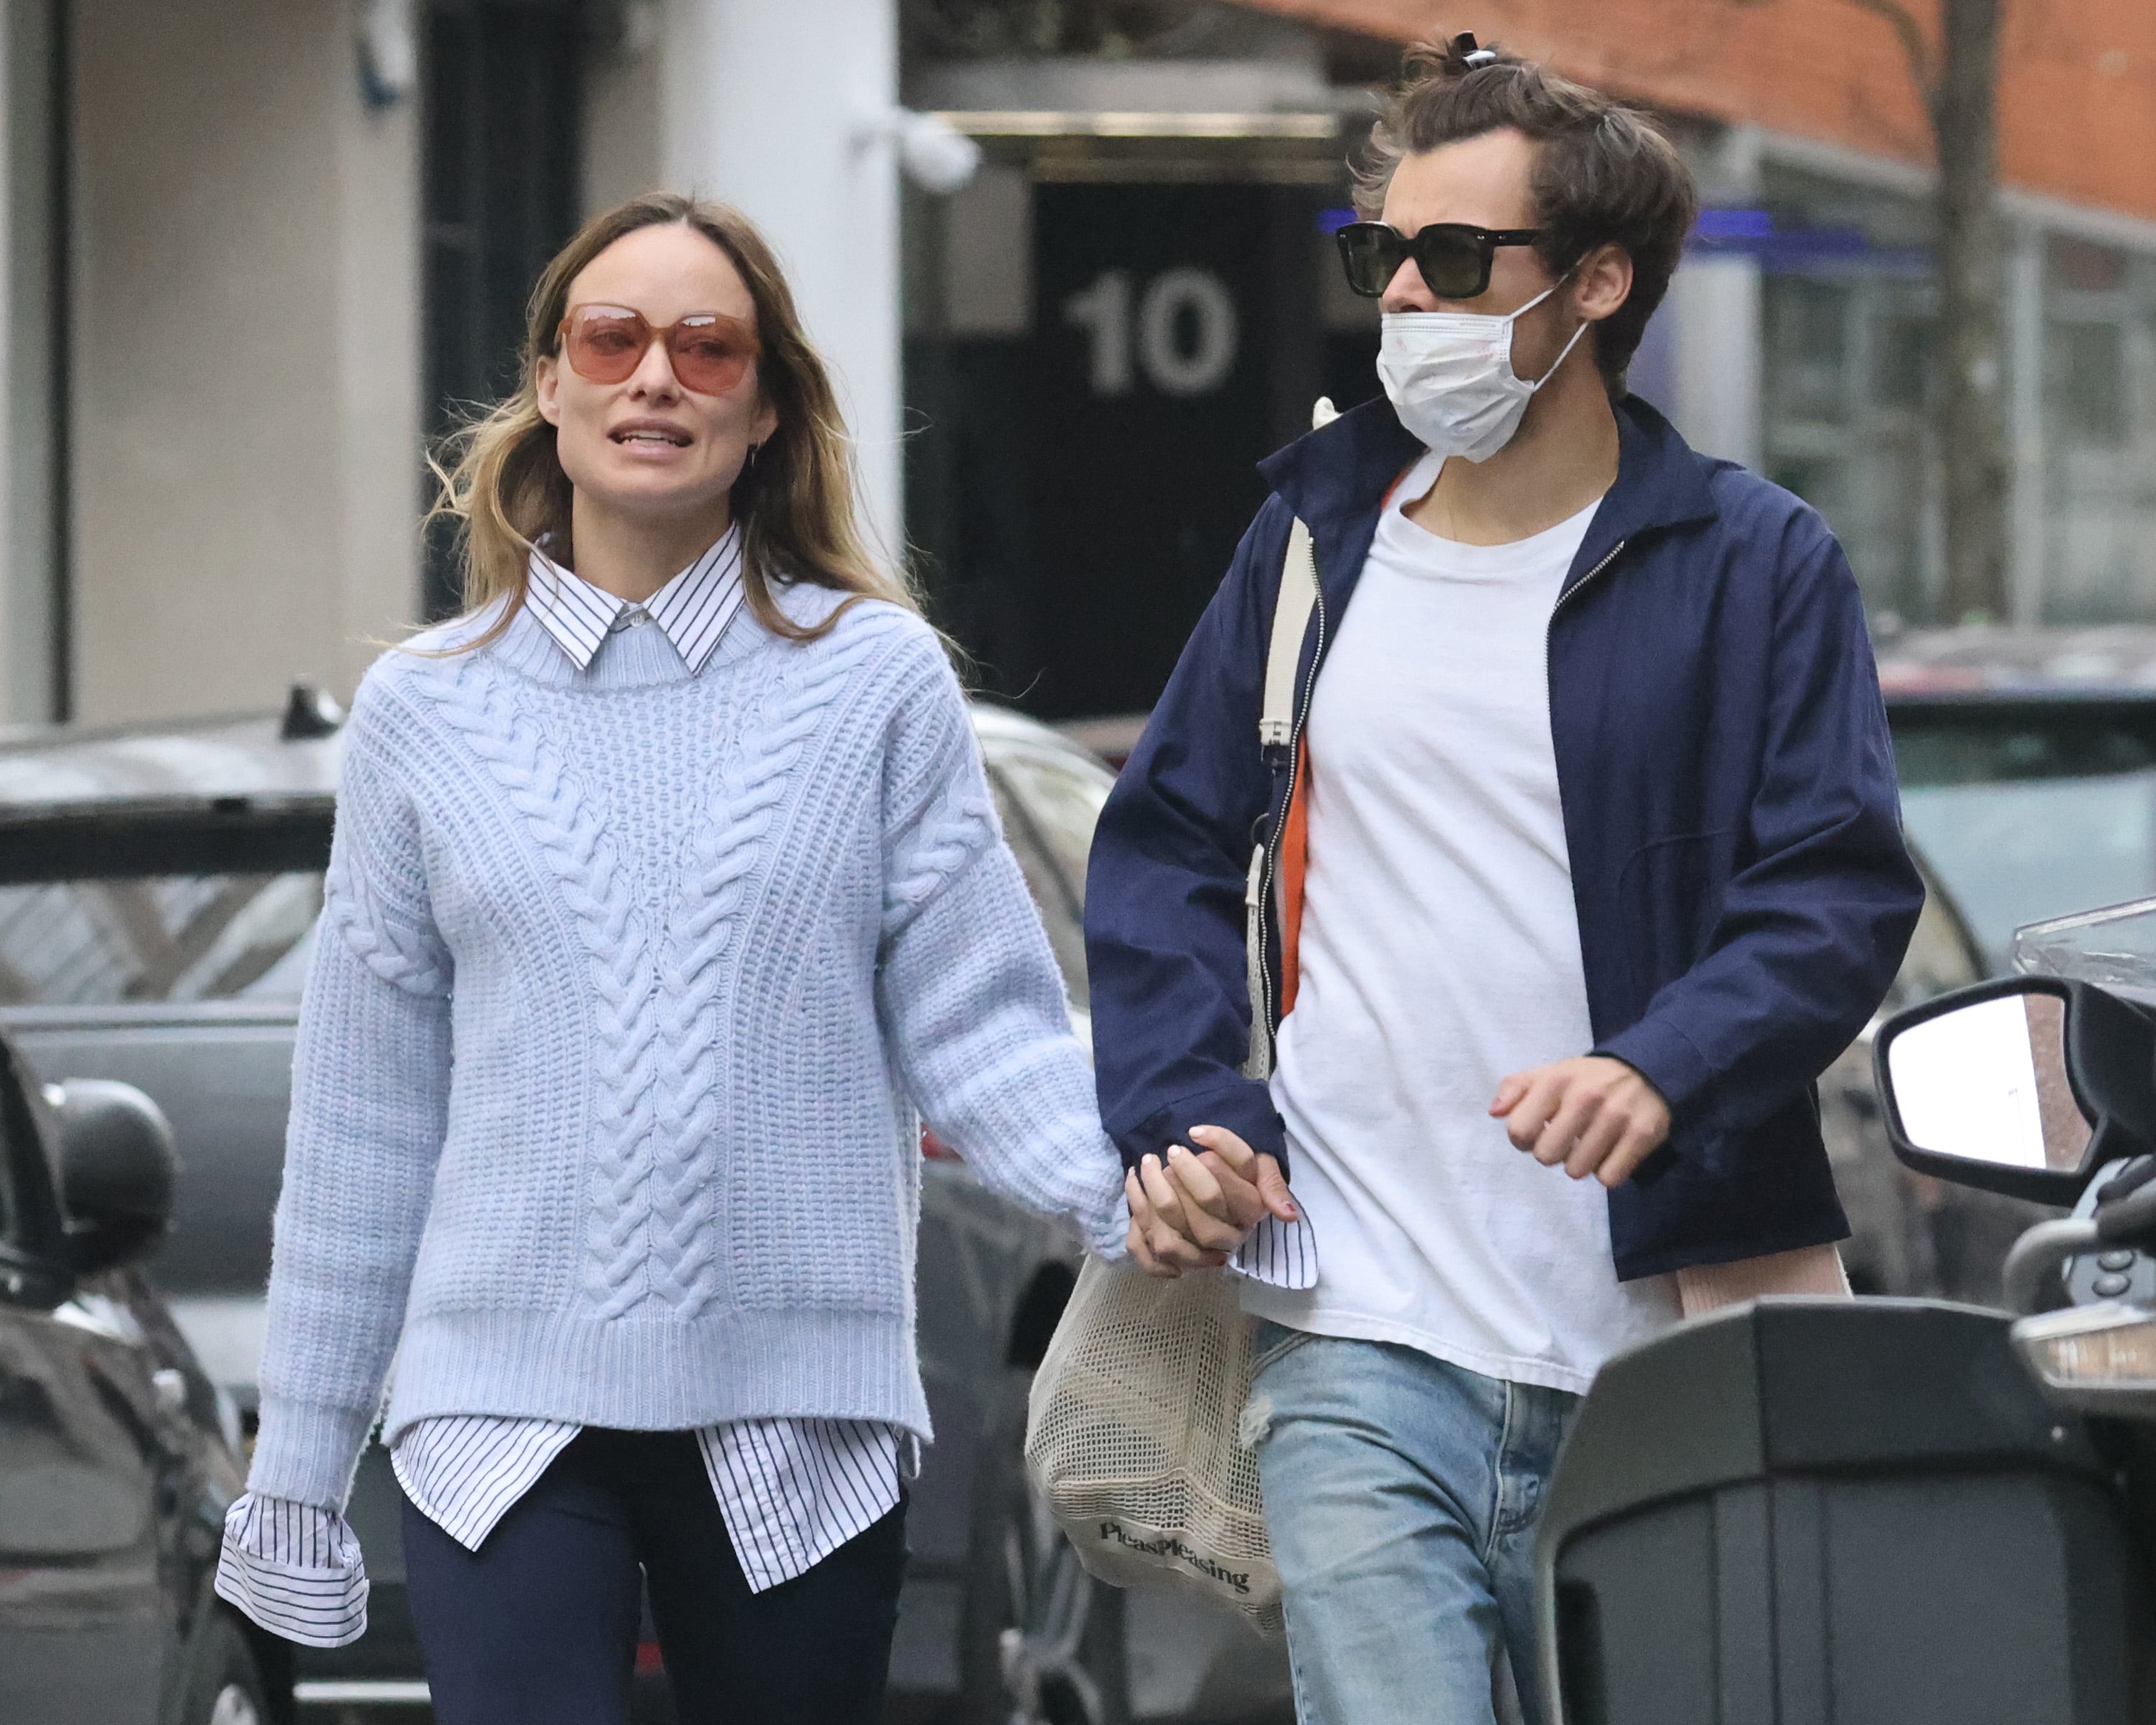 Harry Styles and Olivia Wilde Spotted Out in London